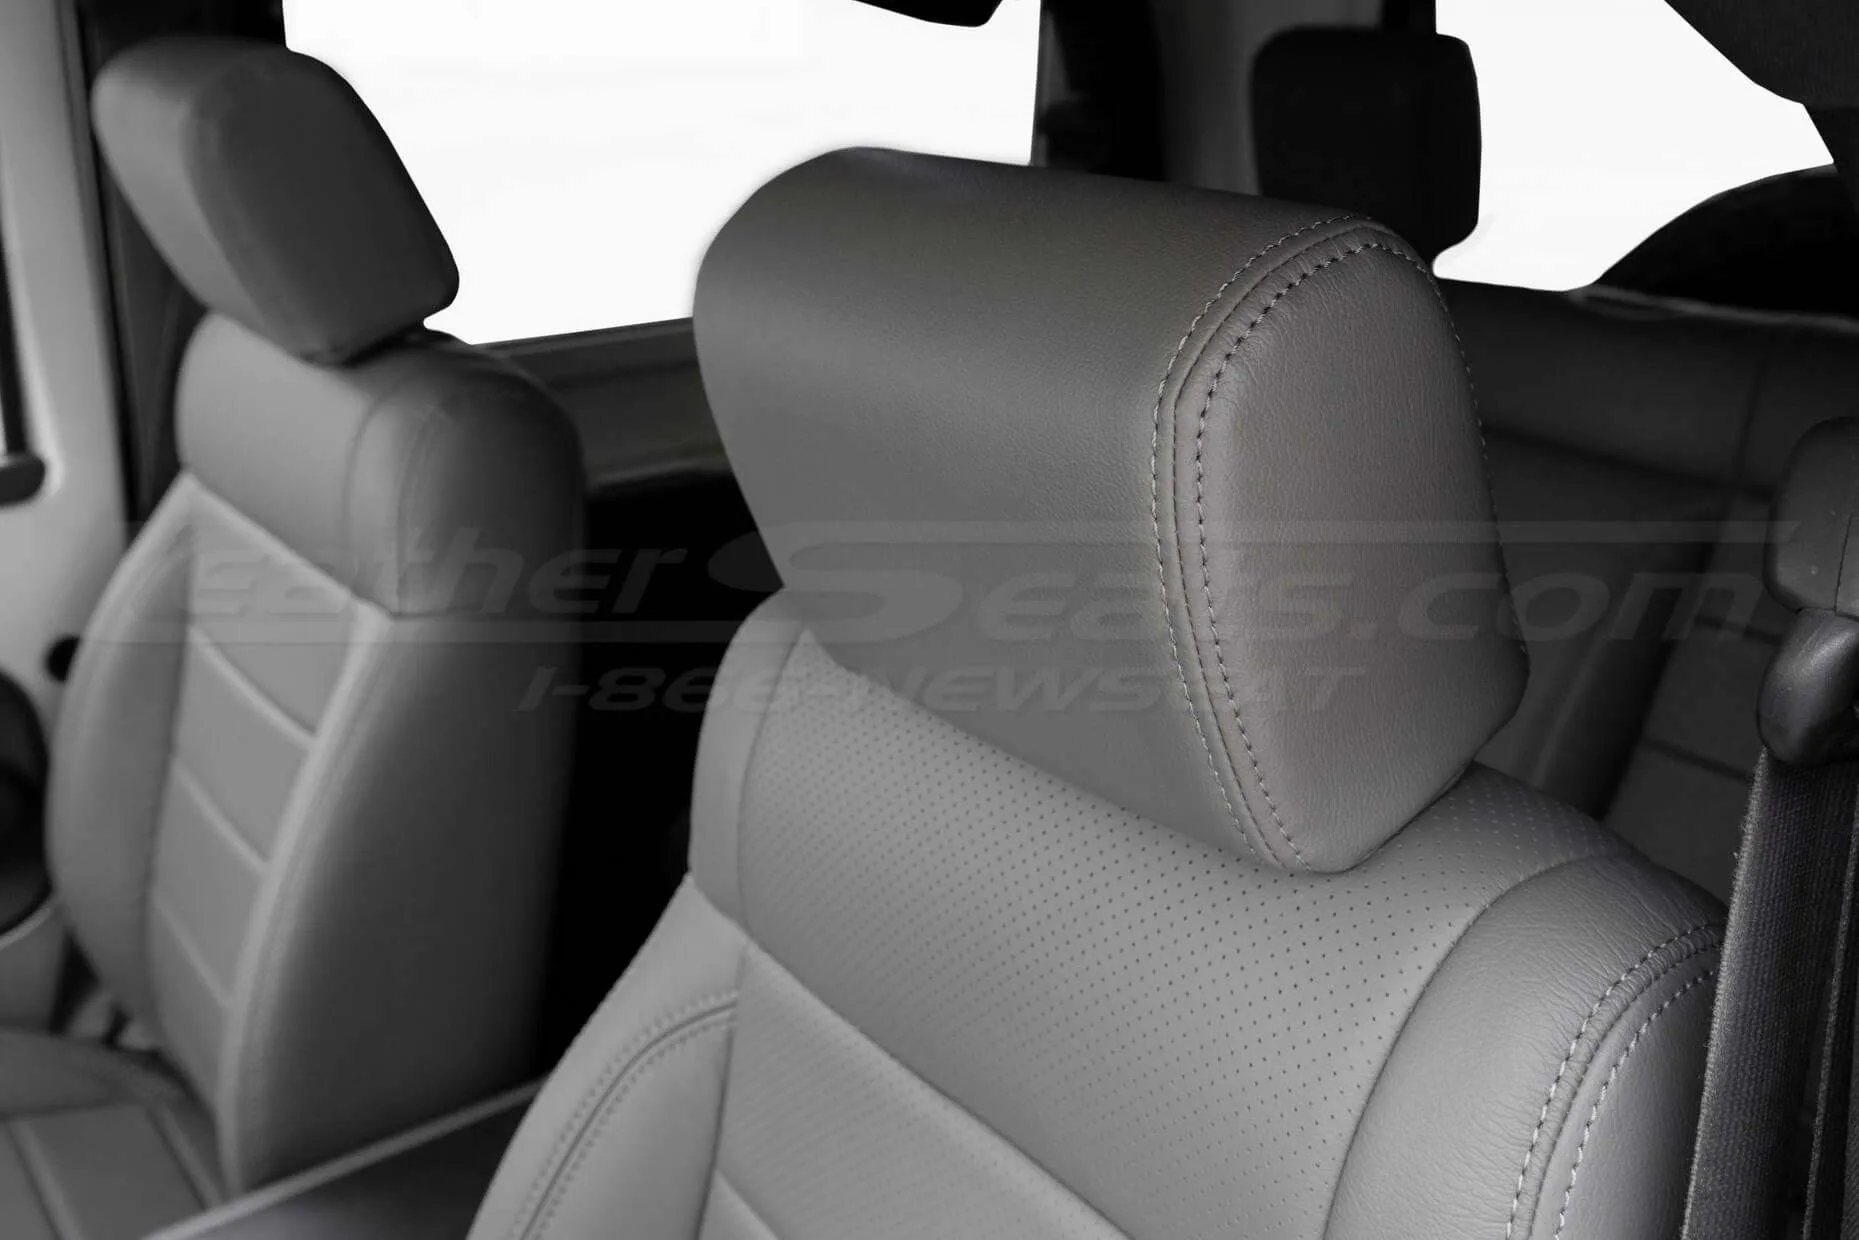 Leather headrest close-up with matching light grey stitching